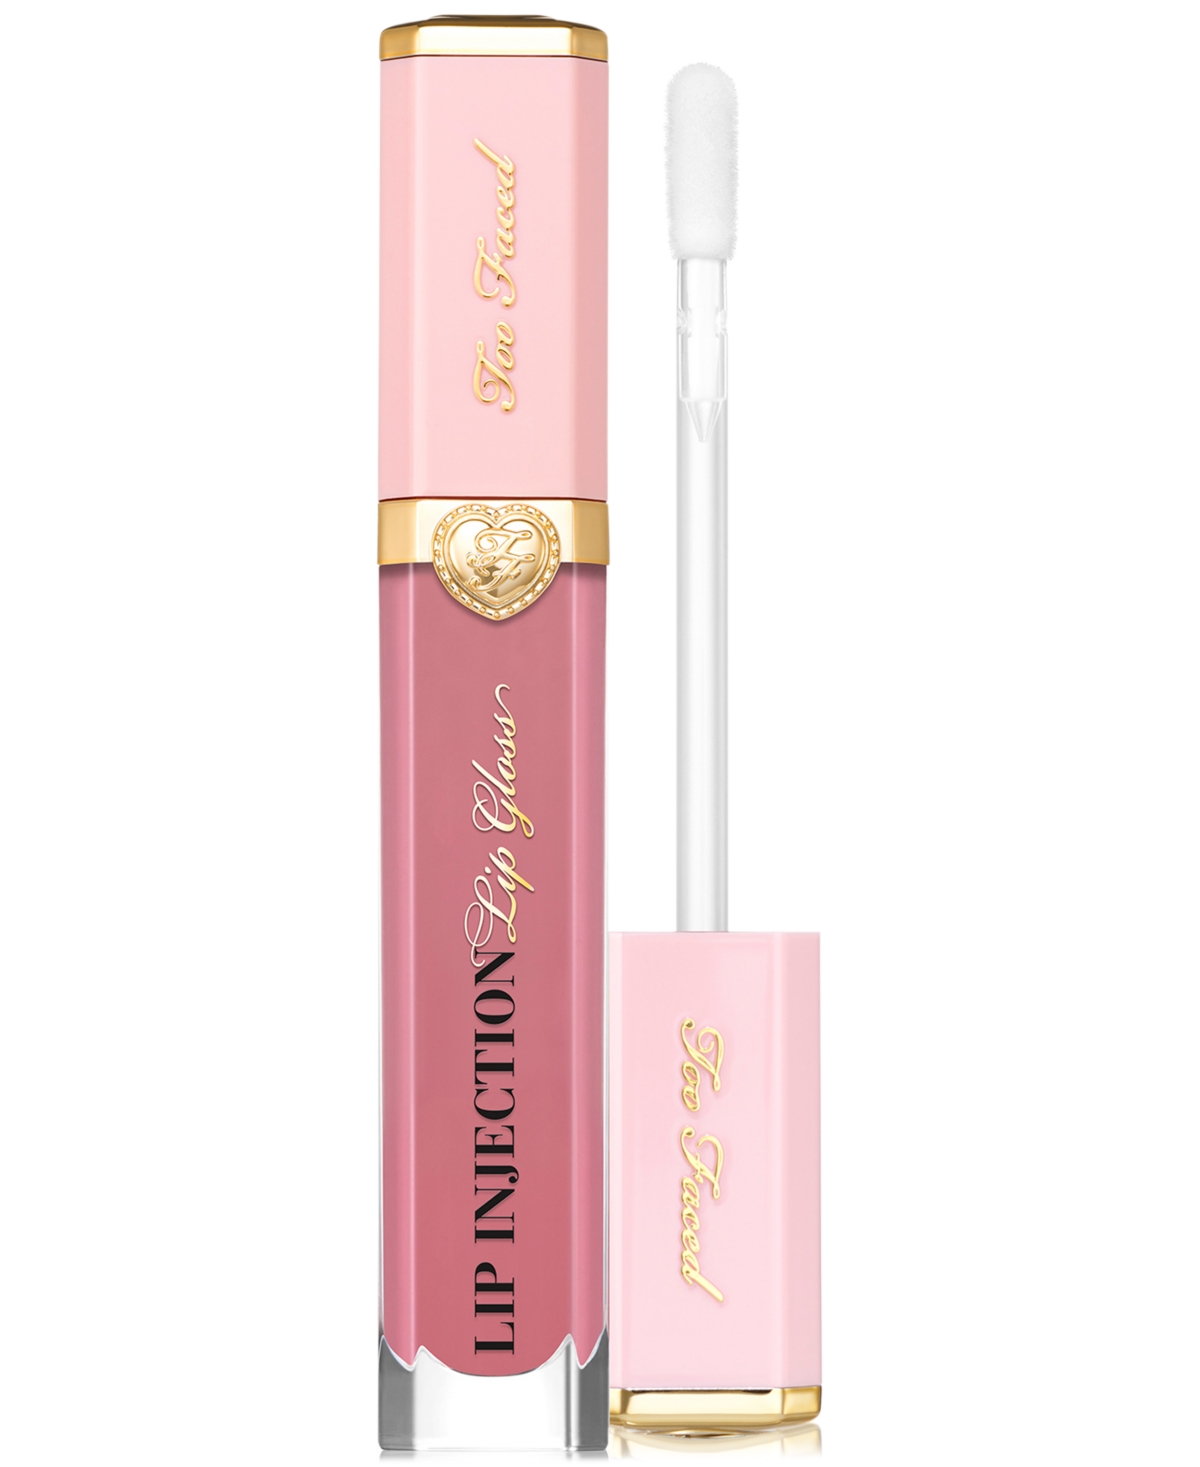 Too Faced Lip Injection Power Plumping Multidimensional Lip Gloss In Glossy  Bossy - Soft Mauve Pink